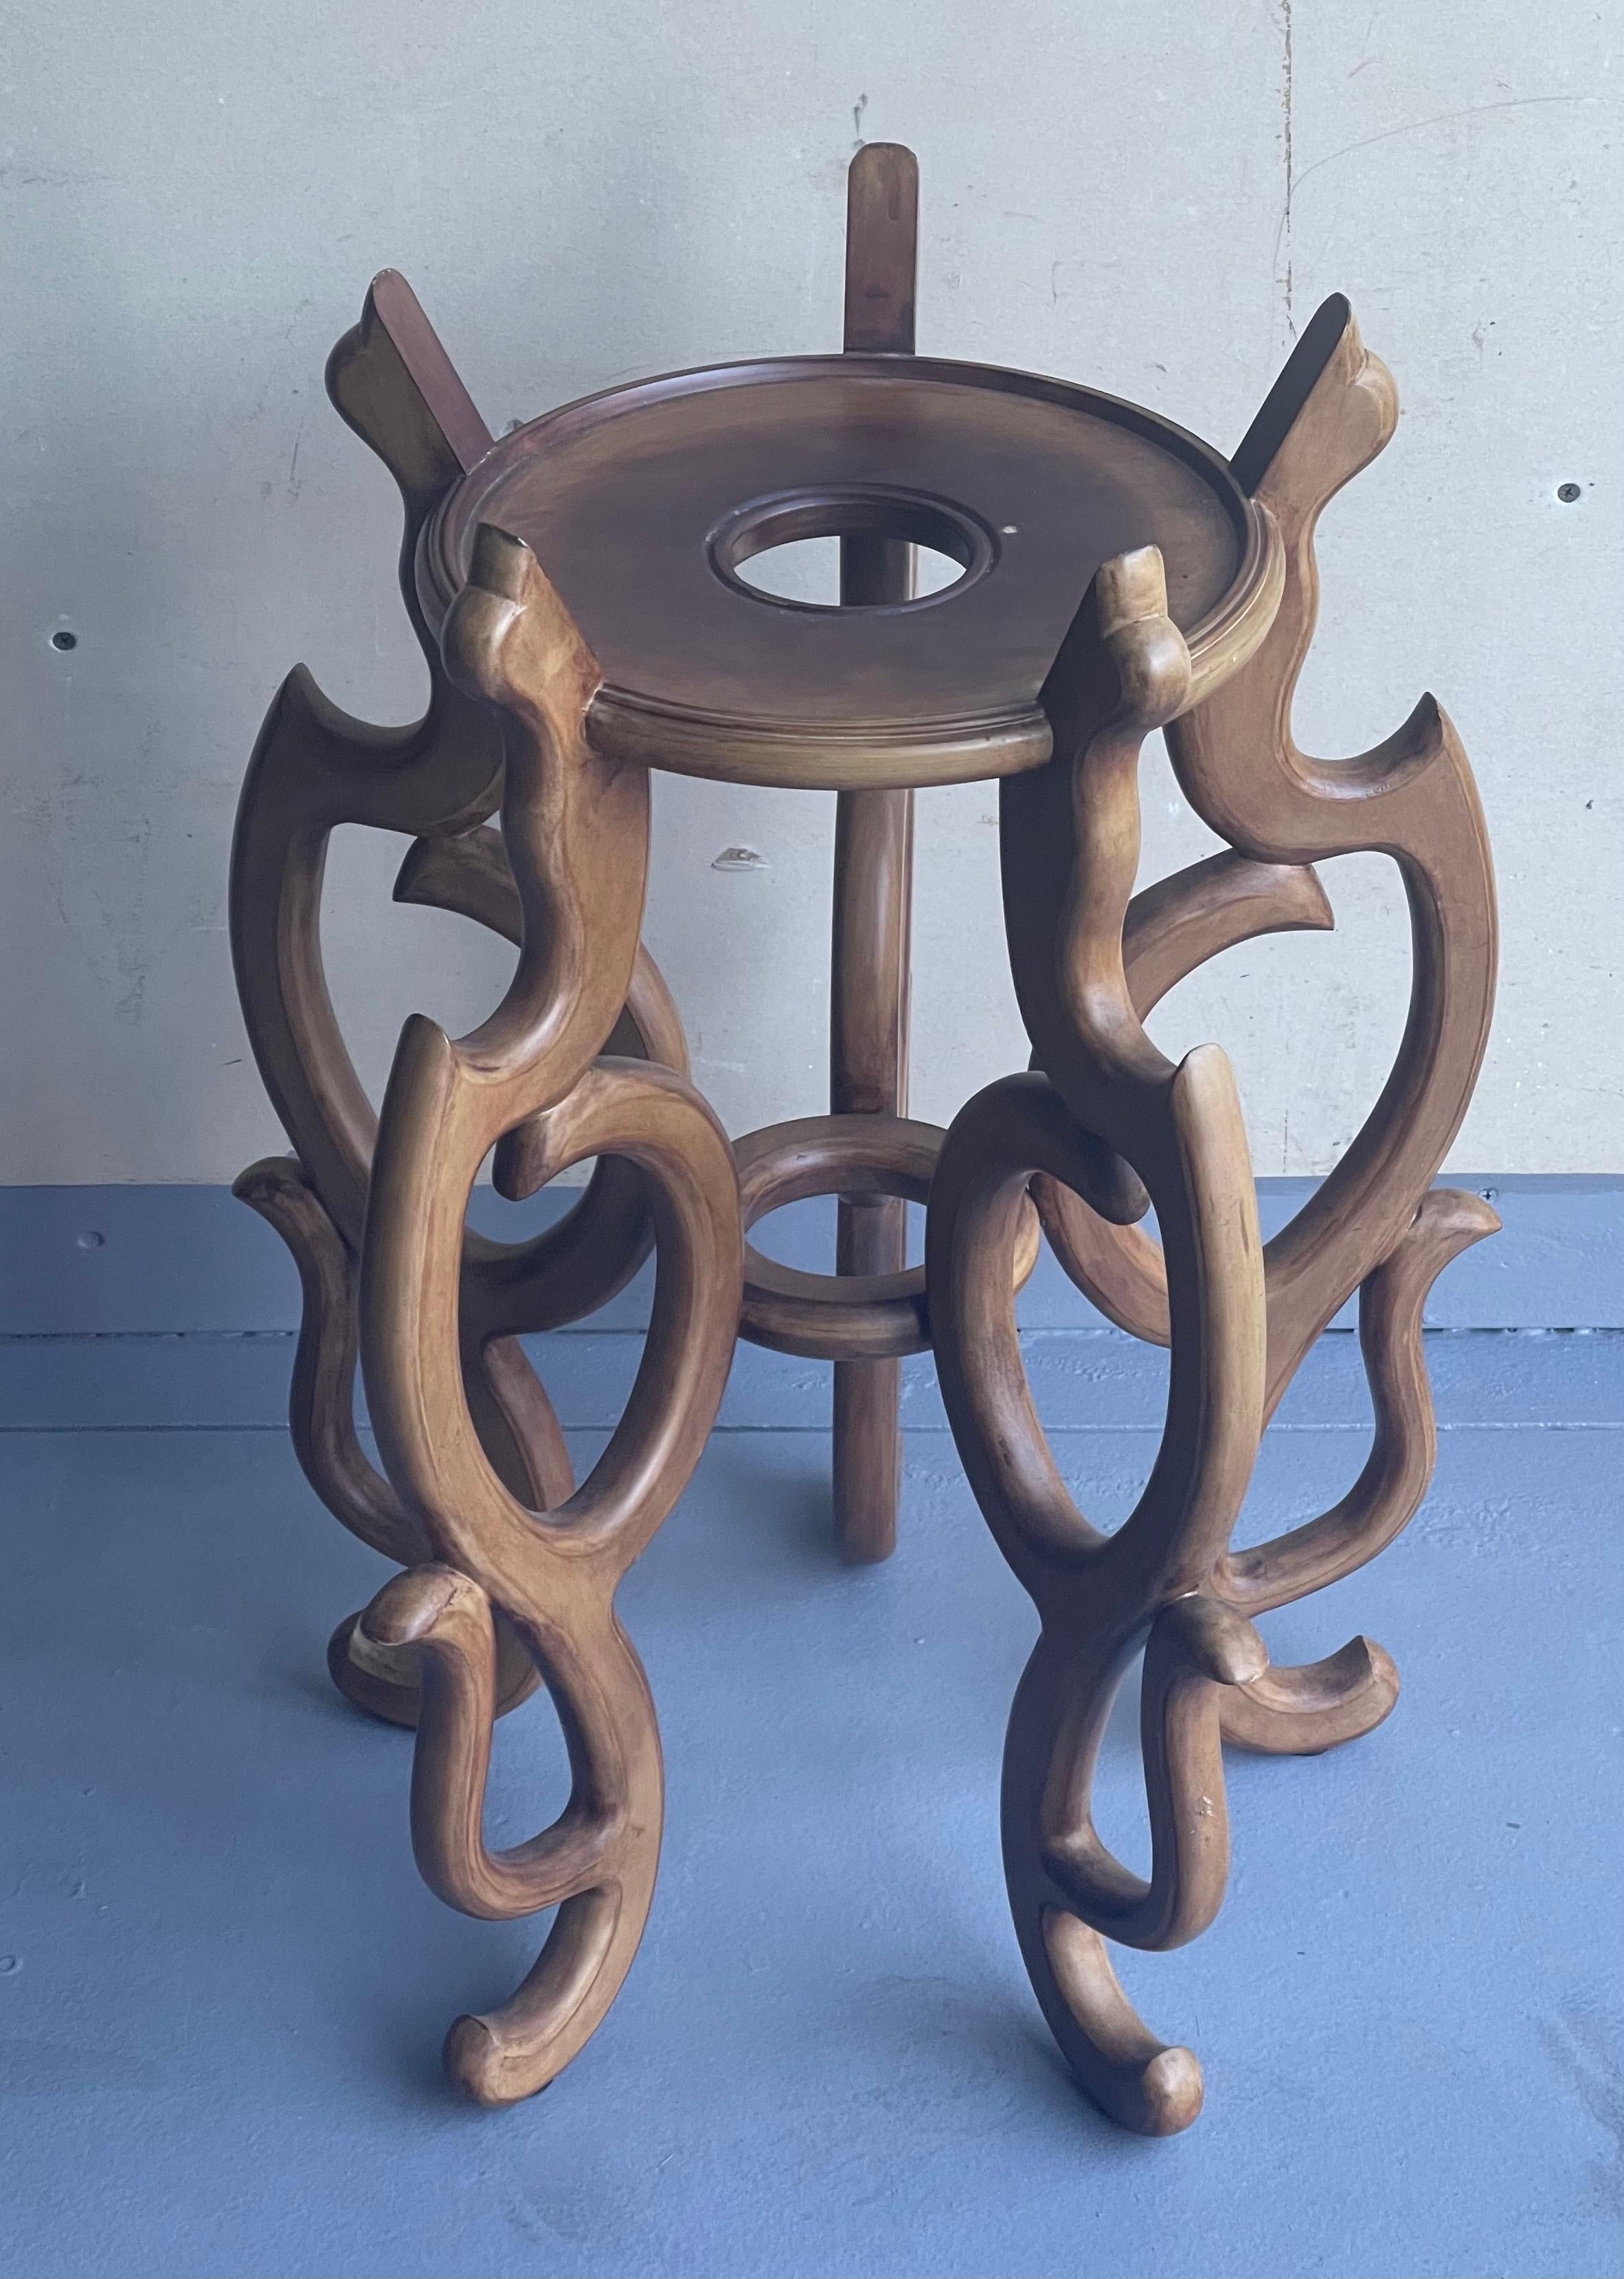 A very nice Chinese import style wooden plant stand, circa first half of 20th century. The stand is in very good vintage condition and measures 18